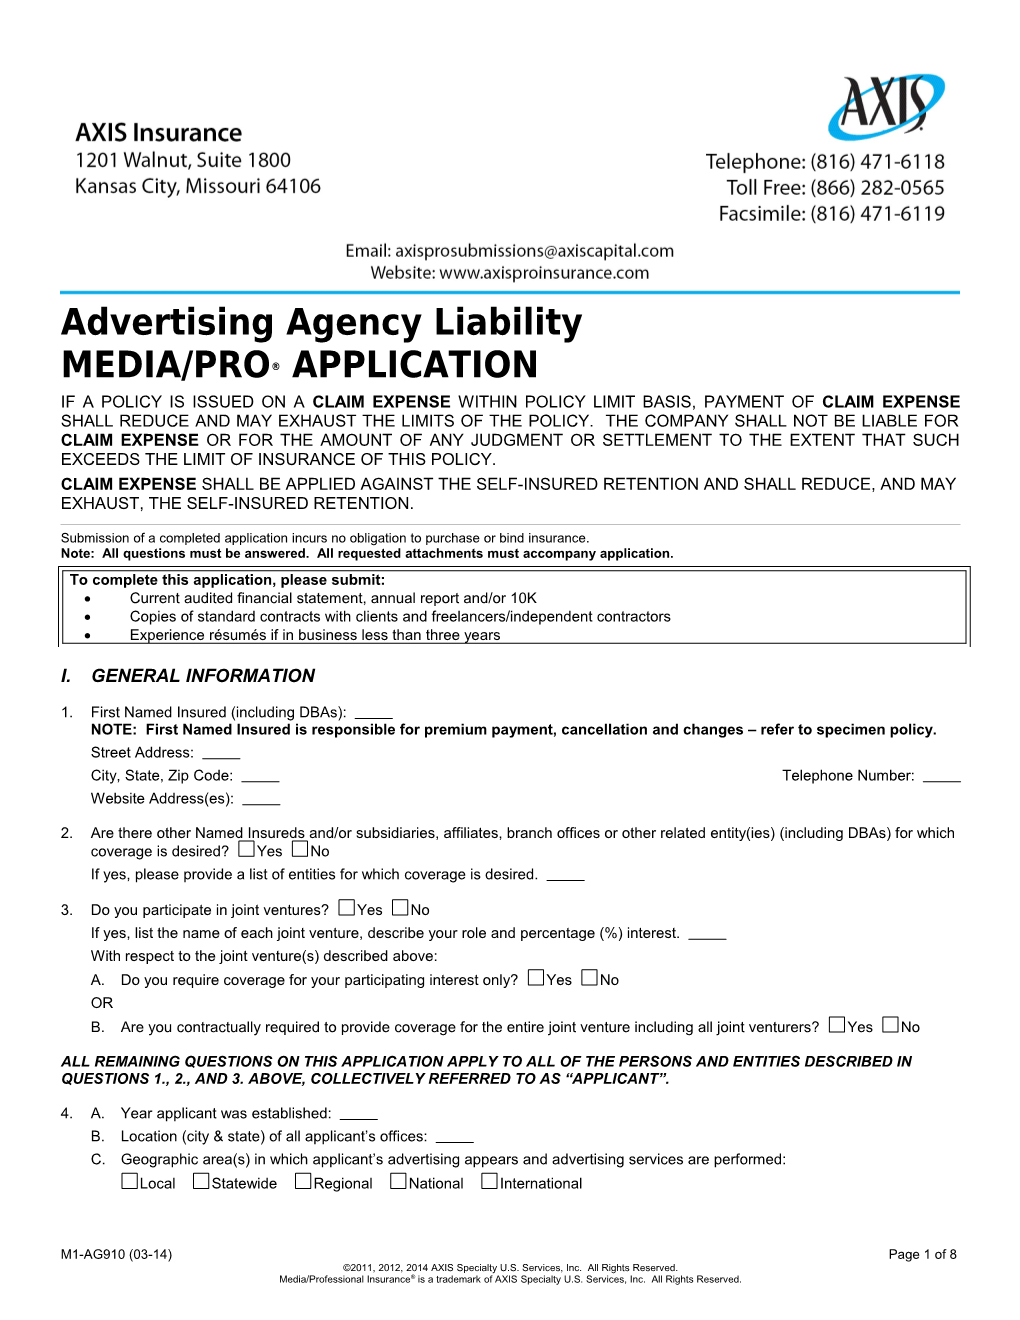 Advertising Agency Liability Application